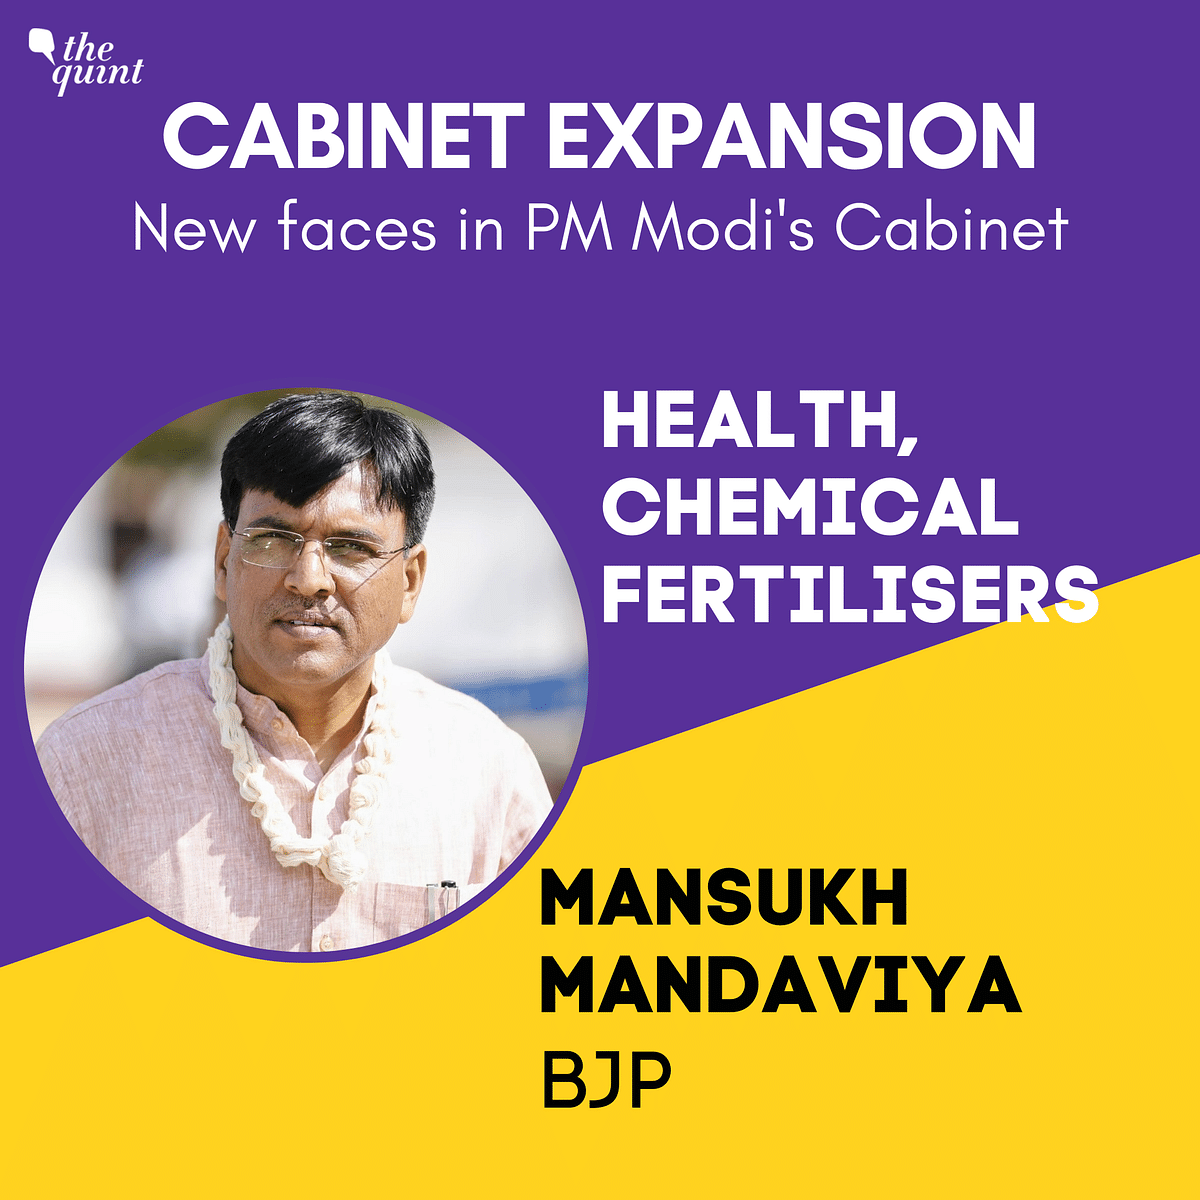 Cabinet reshuffle: Newly-inducted minister Mansukh Mandaviya has been given the health portfolio.